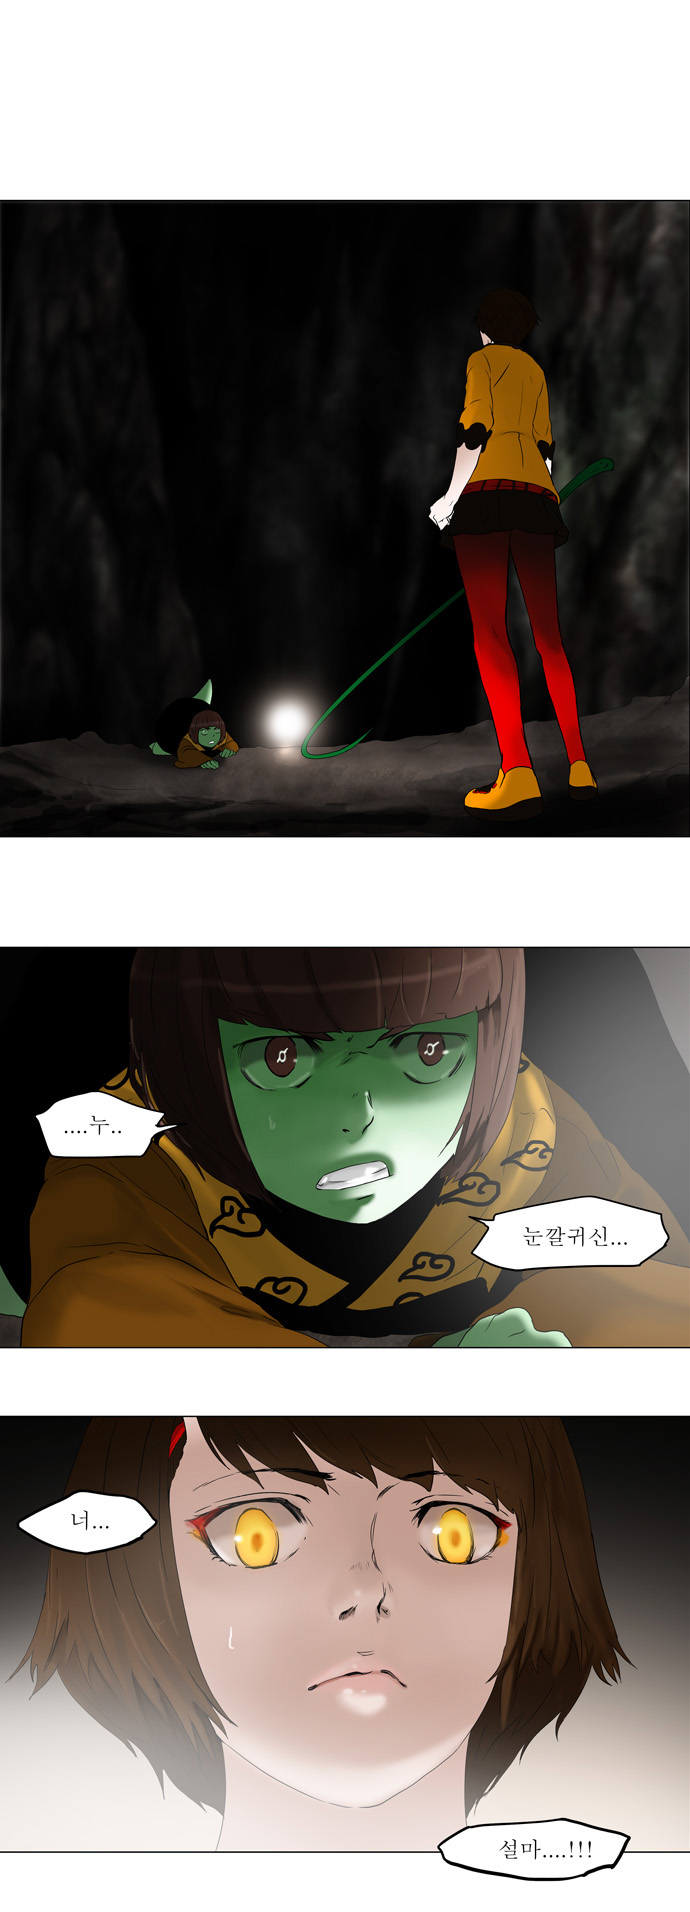 Tower of God - Chapter 69 - Page 1